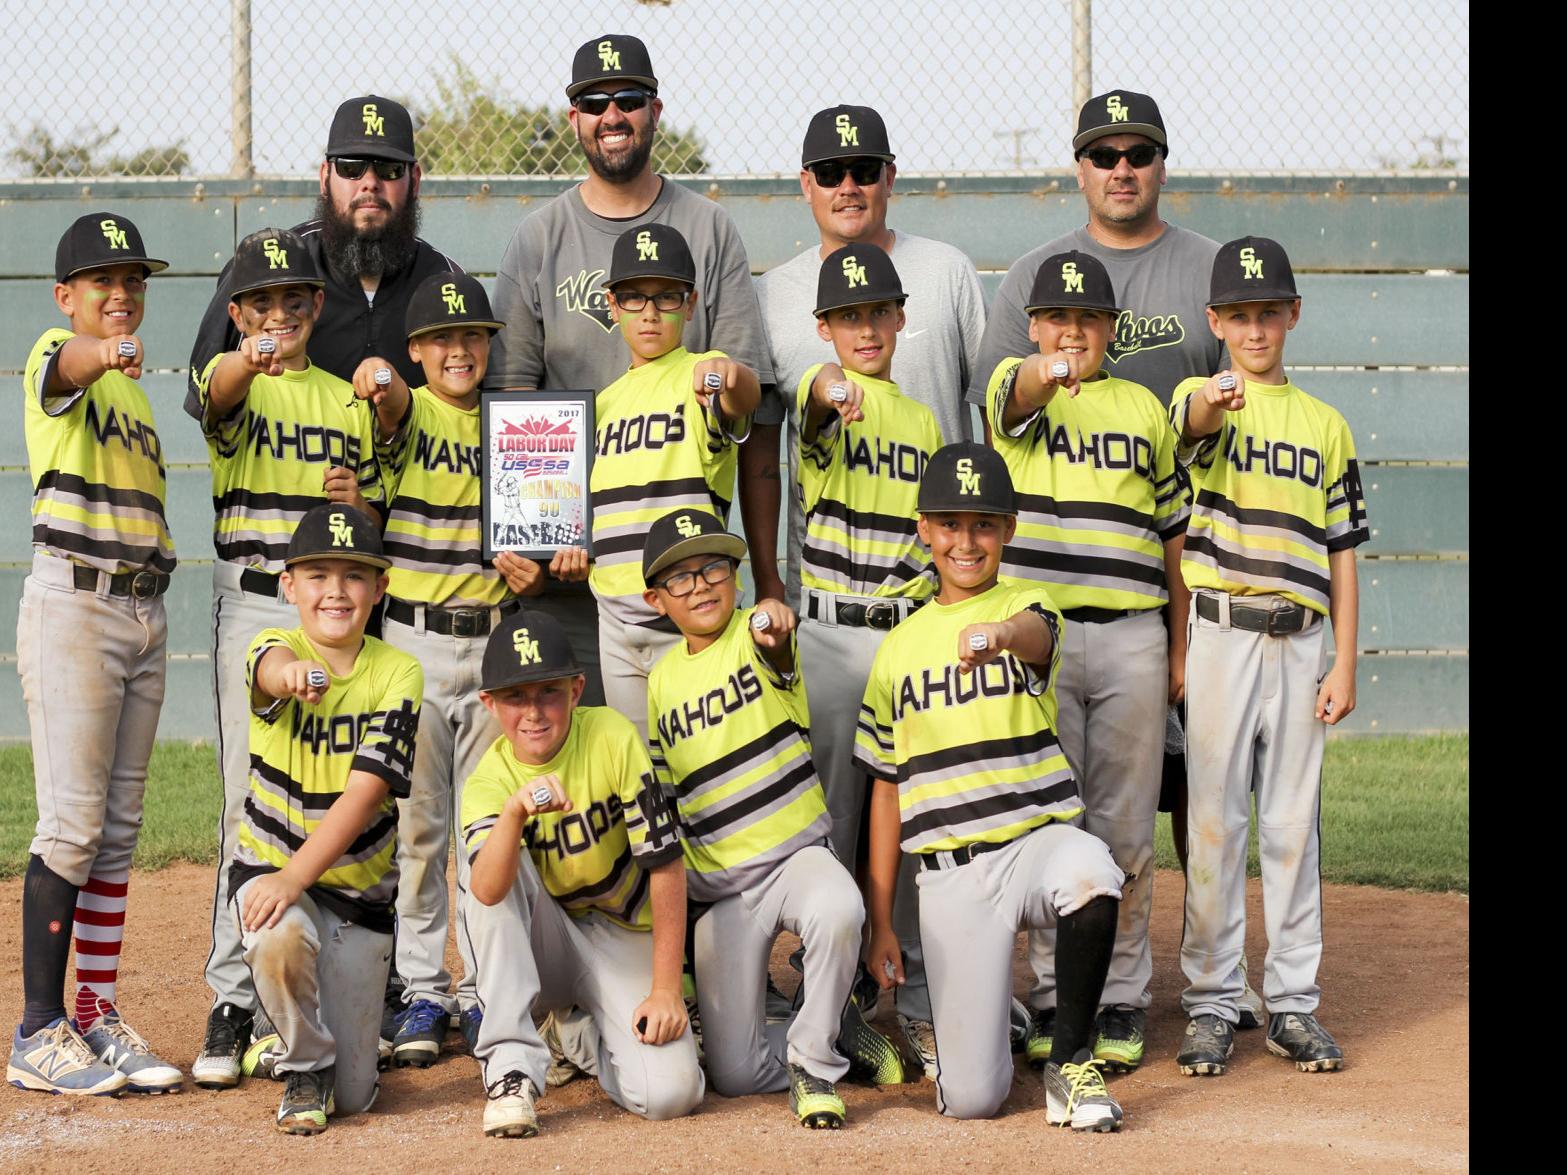 Youth Baseball: Wahoos win Labor Day Tournament, Local Sports